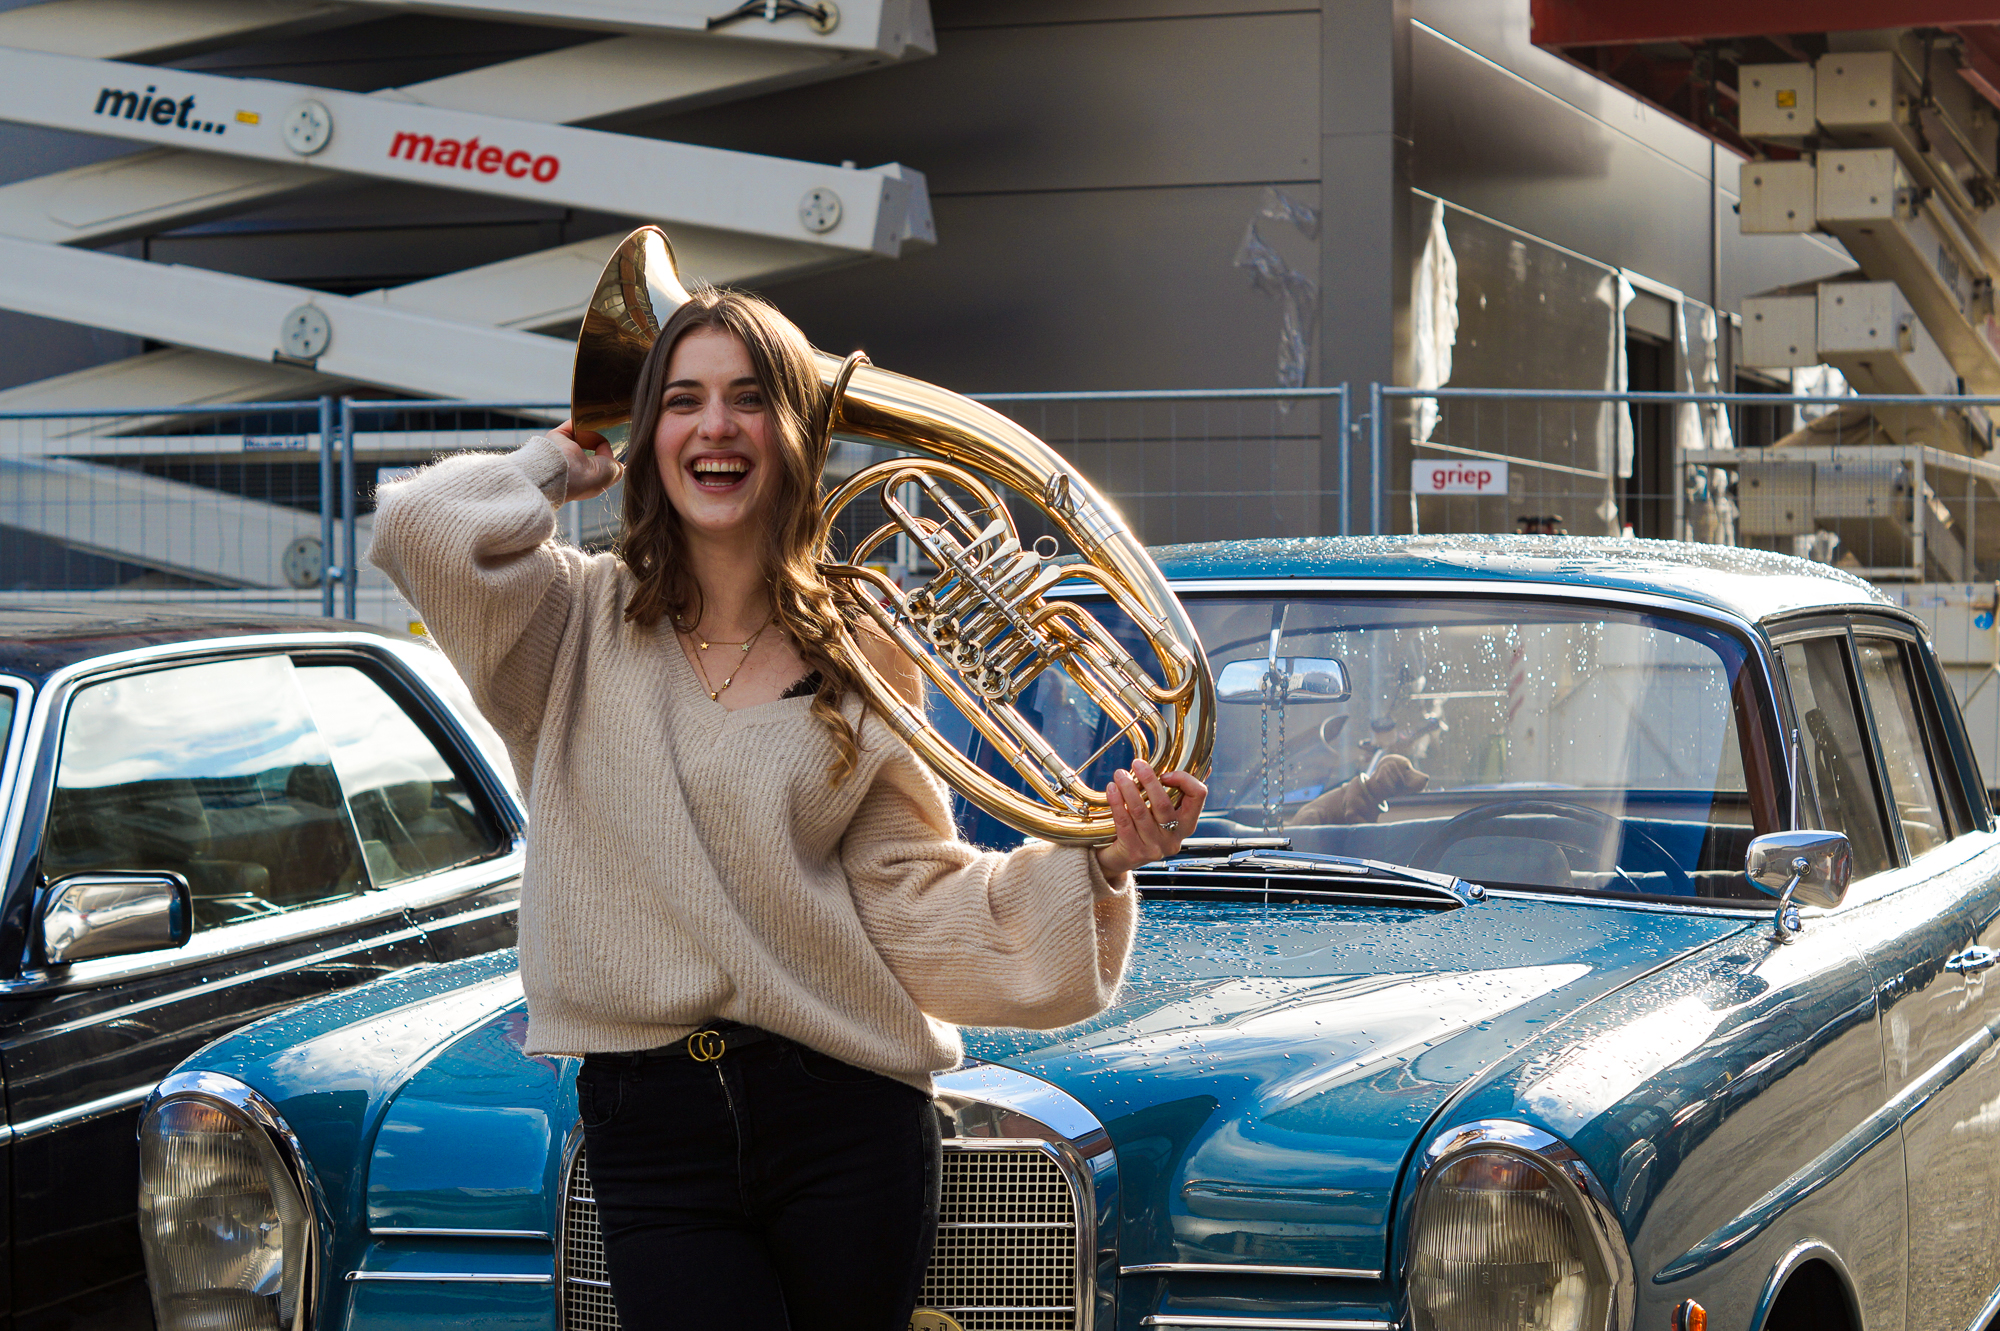 Horn player with her instrument in front of vintage car